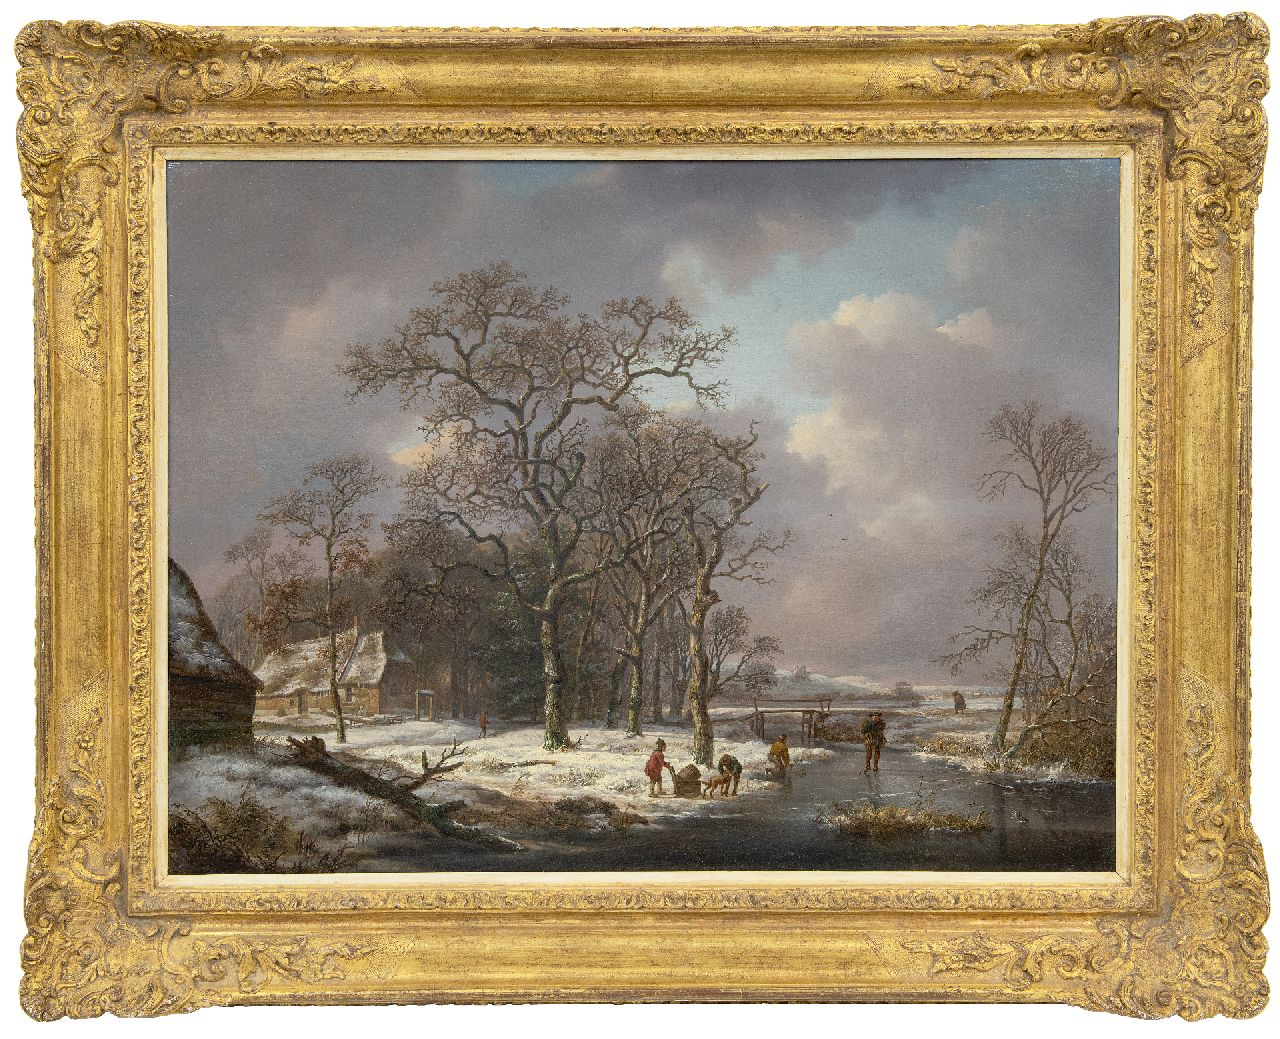 Schelfhout A.  | Andreas Schelfhout | Paintings offered for sale | A snowy landscape with figures on a frozen ditch, oil on panel 53.2 x 71.0 cm, signed l.c. and painted ca. 1815-1820